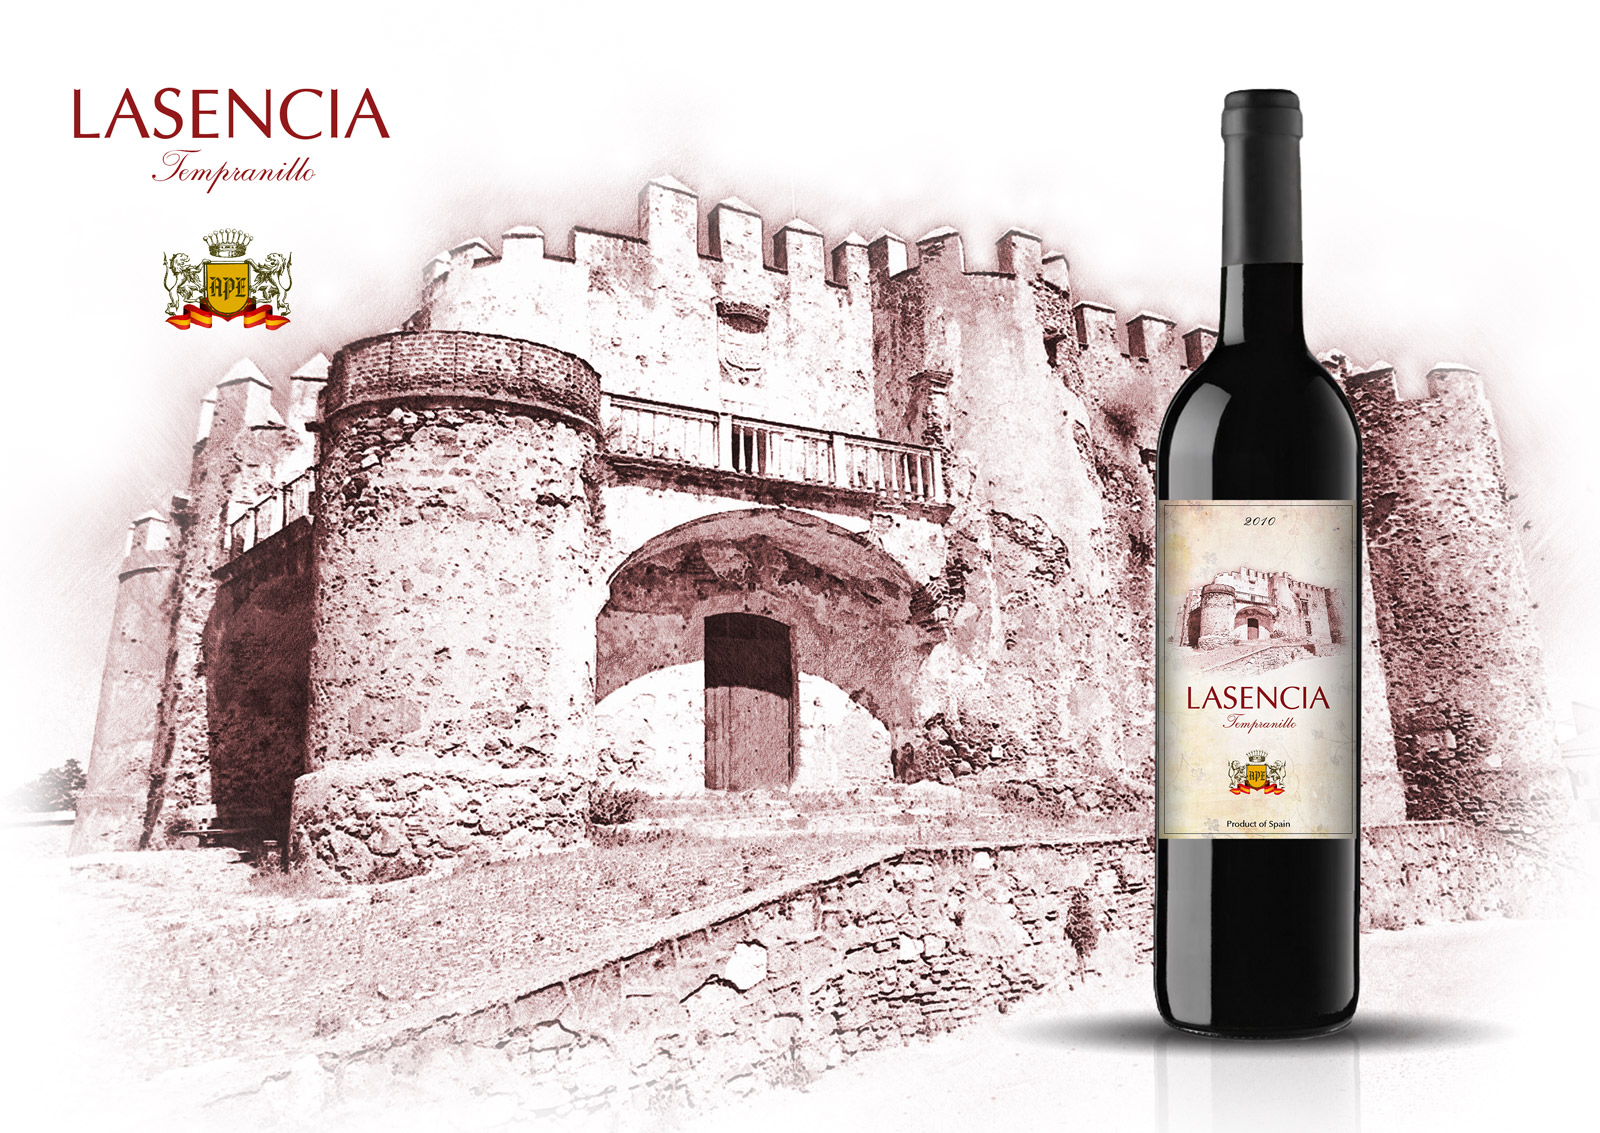 Portfolio of graphic and creative design works wine labels and packaging for Spanish wine LASENCIA